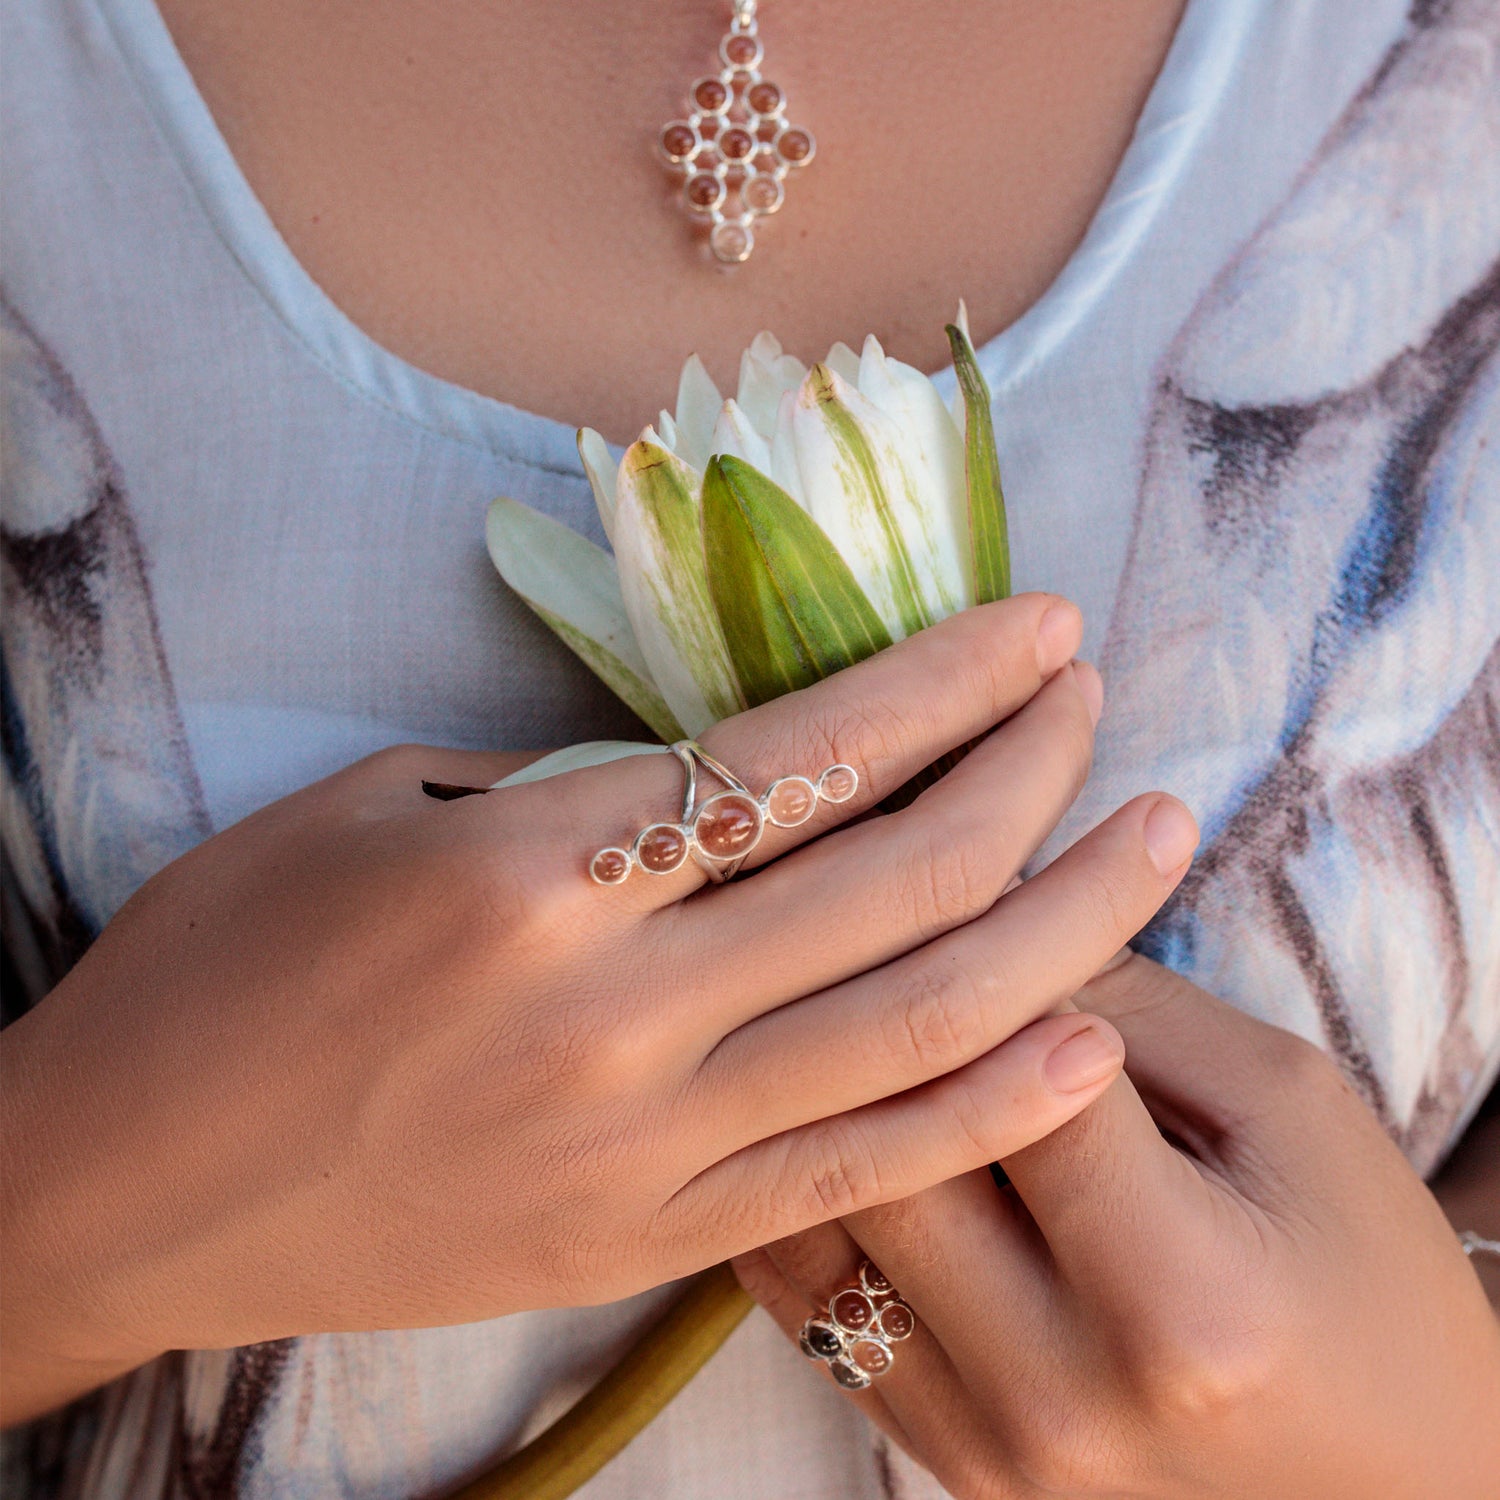 Find gemstone accessories that reflect your personal style with the ring harmony crystal collection.